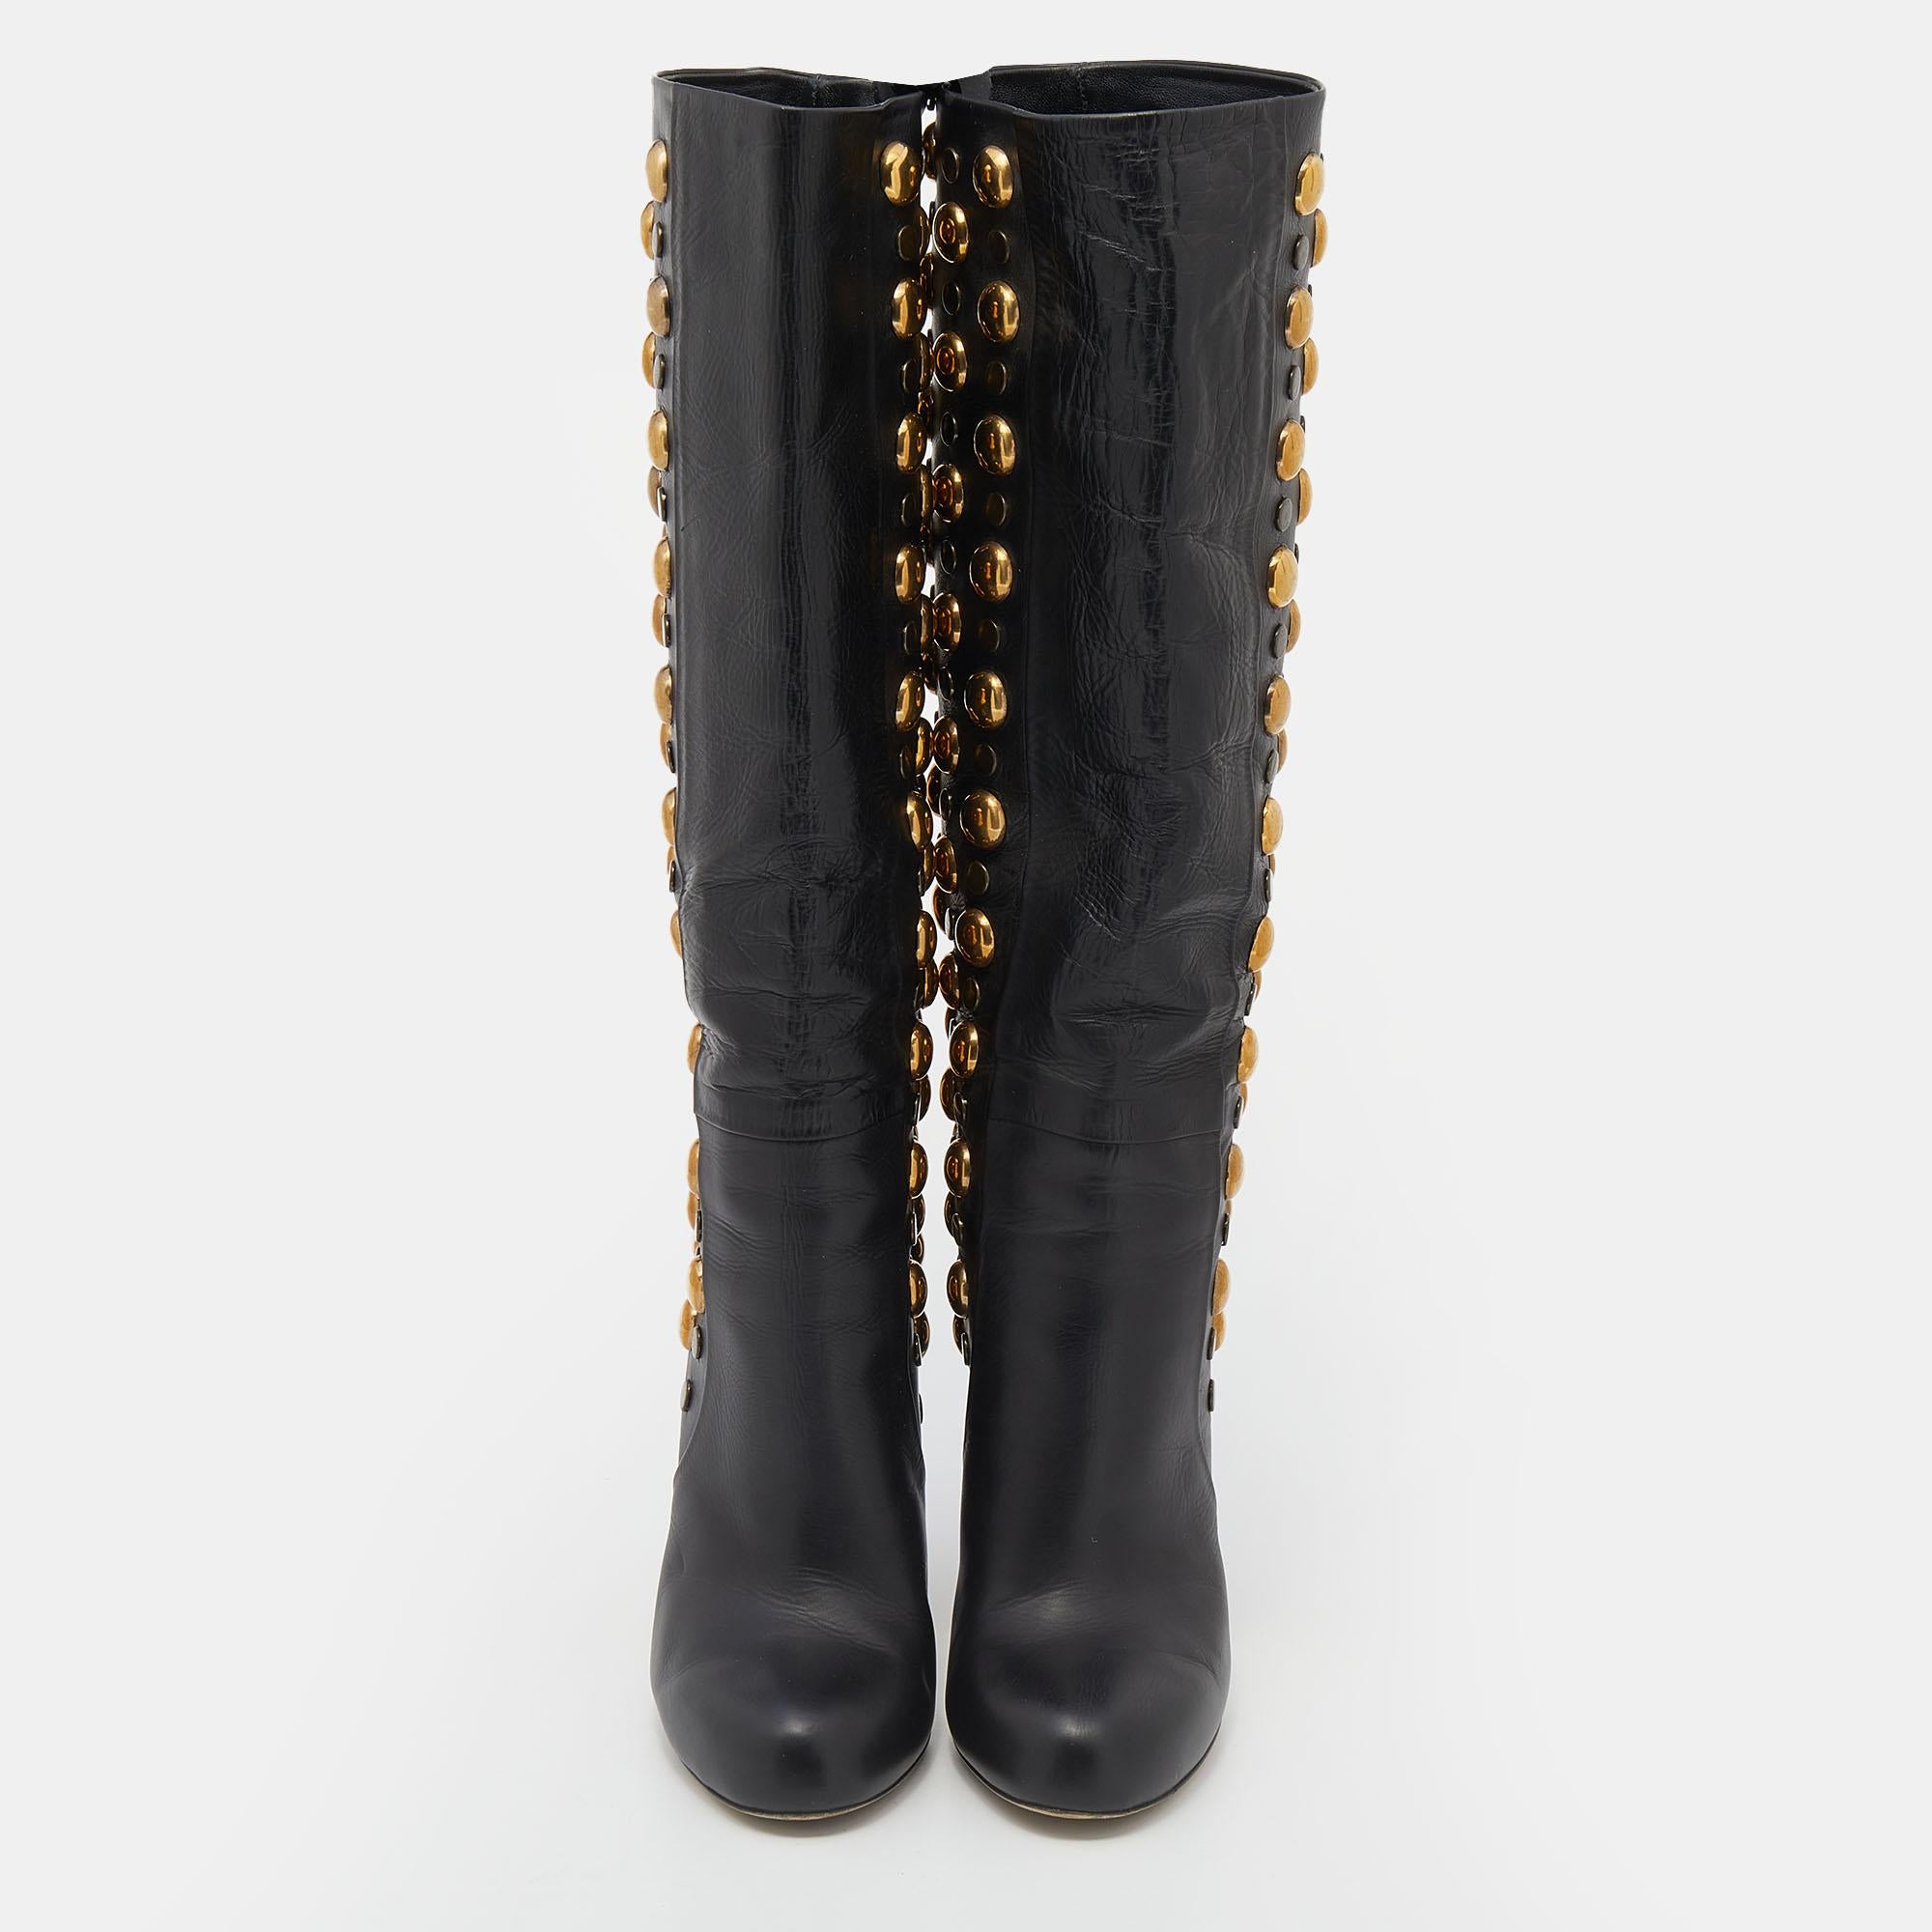 Gucci brings you these gorgeous mid-calf boots that will look amazing with midi skirts and dresses. They've been crafted from black leather and flaunt stylish gold-tone studs. Comfy insoles and 11 cm heels finish off the beauties.

Includes: